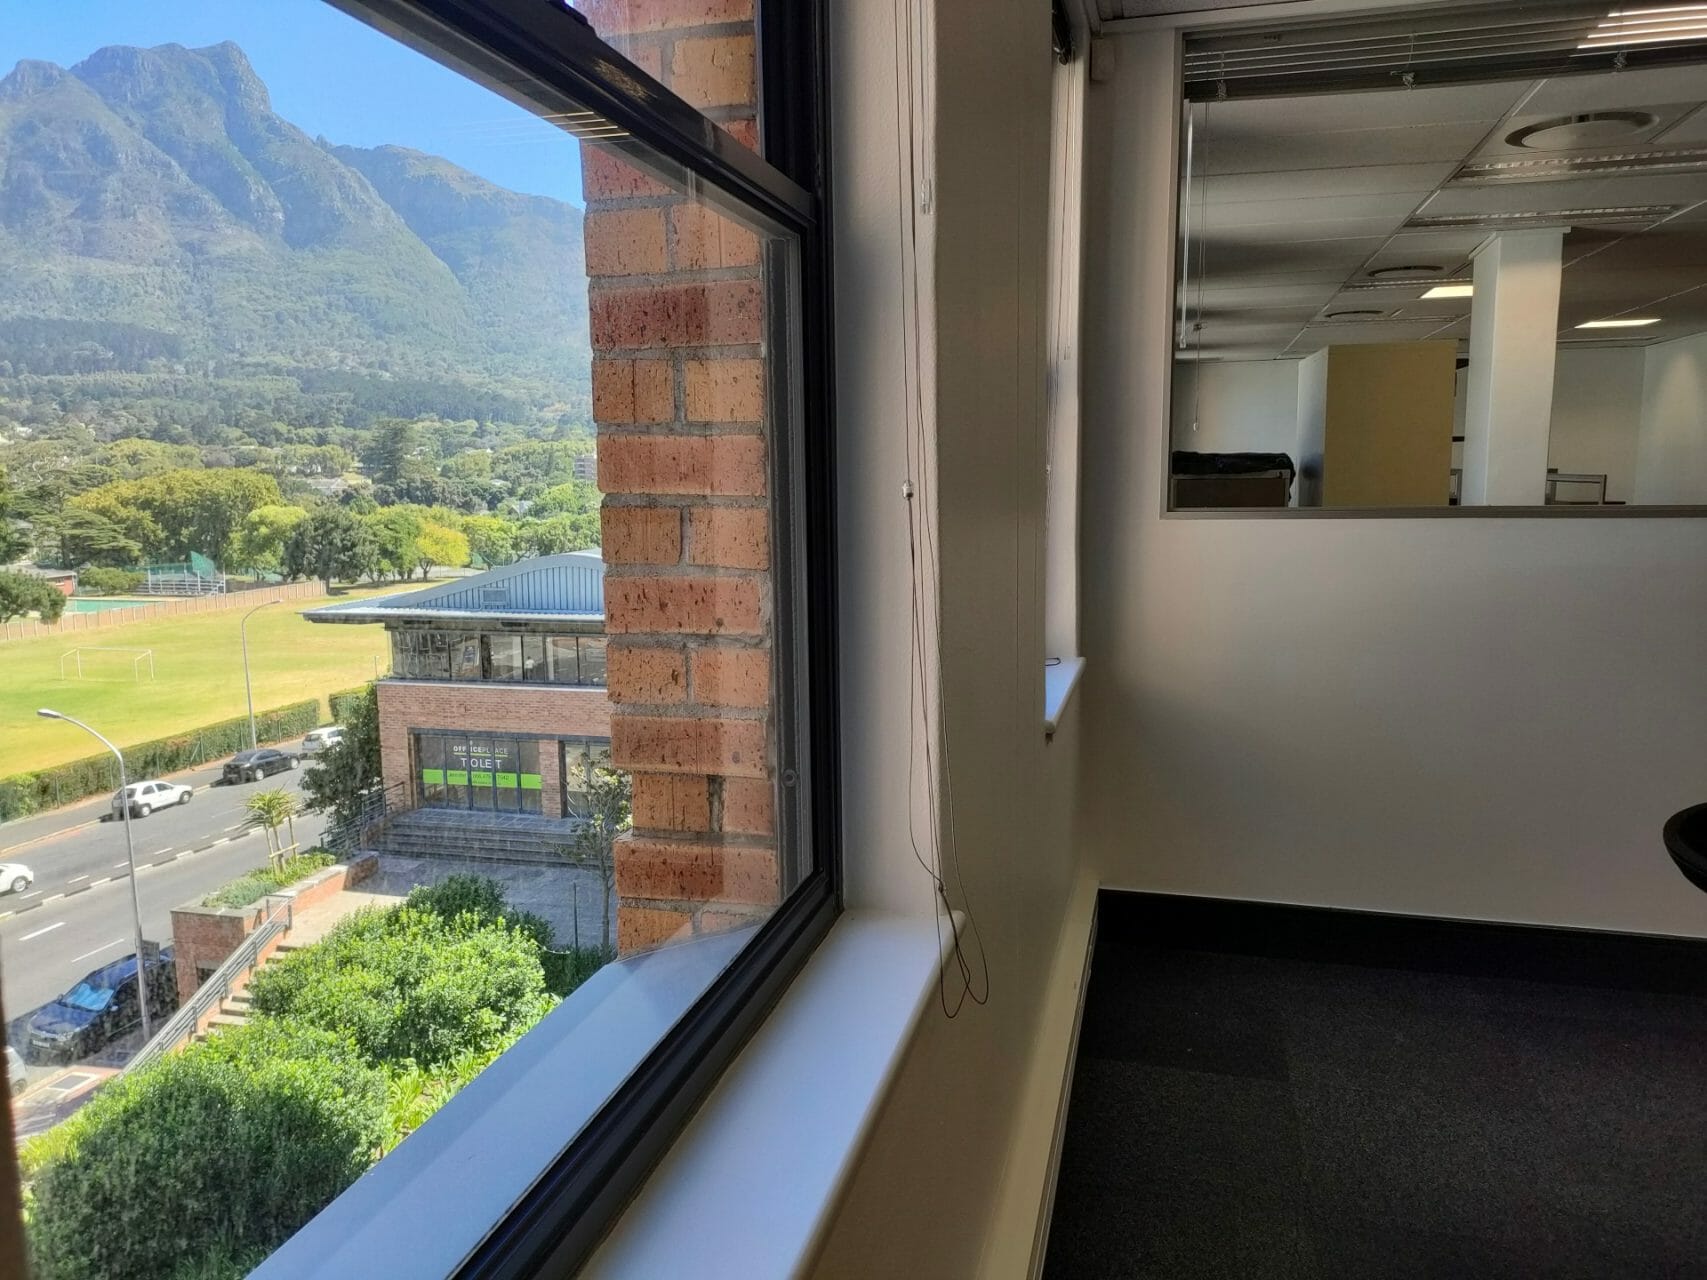 145m² – Attractive, turnkey unit in the trendy Newlands on Main building.